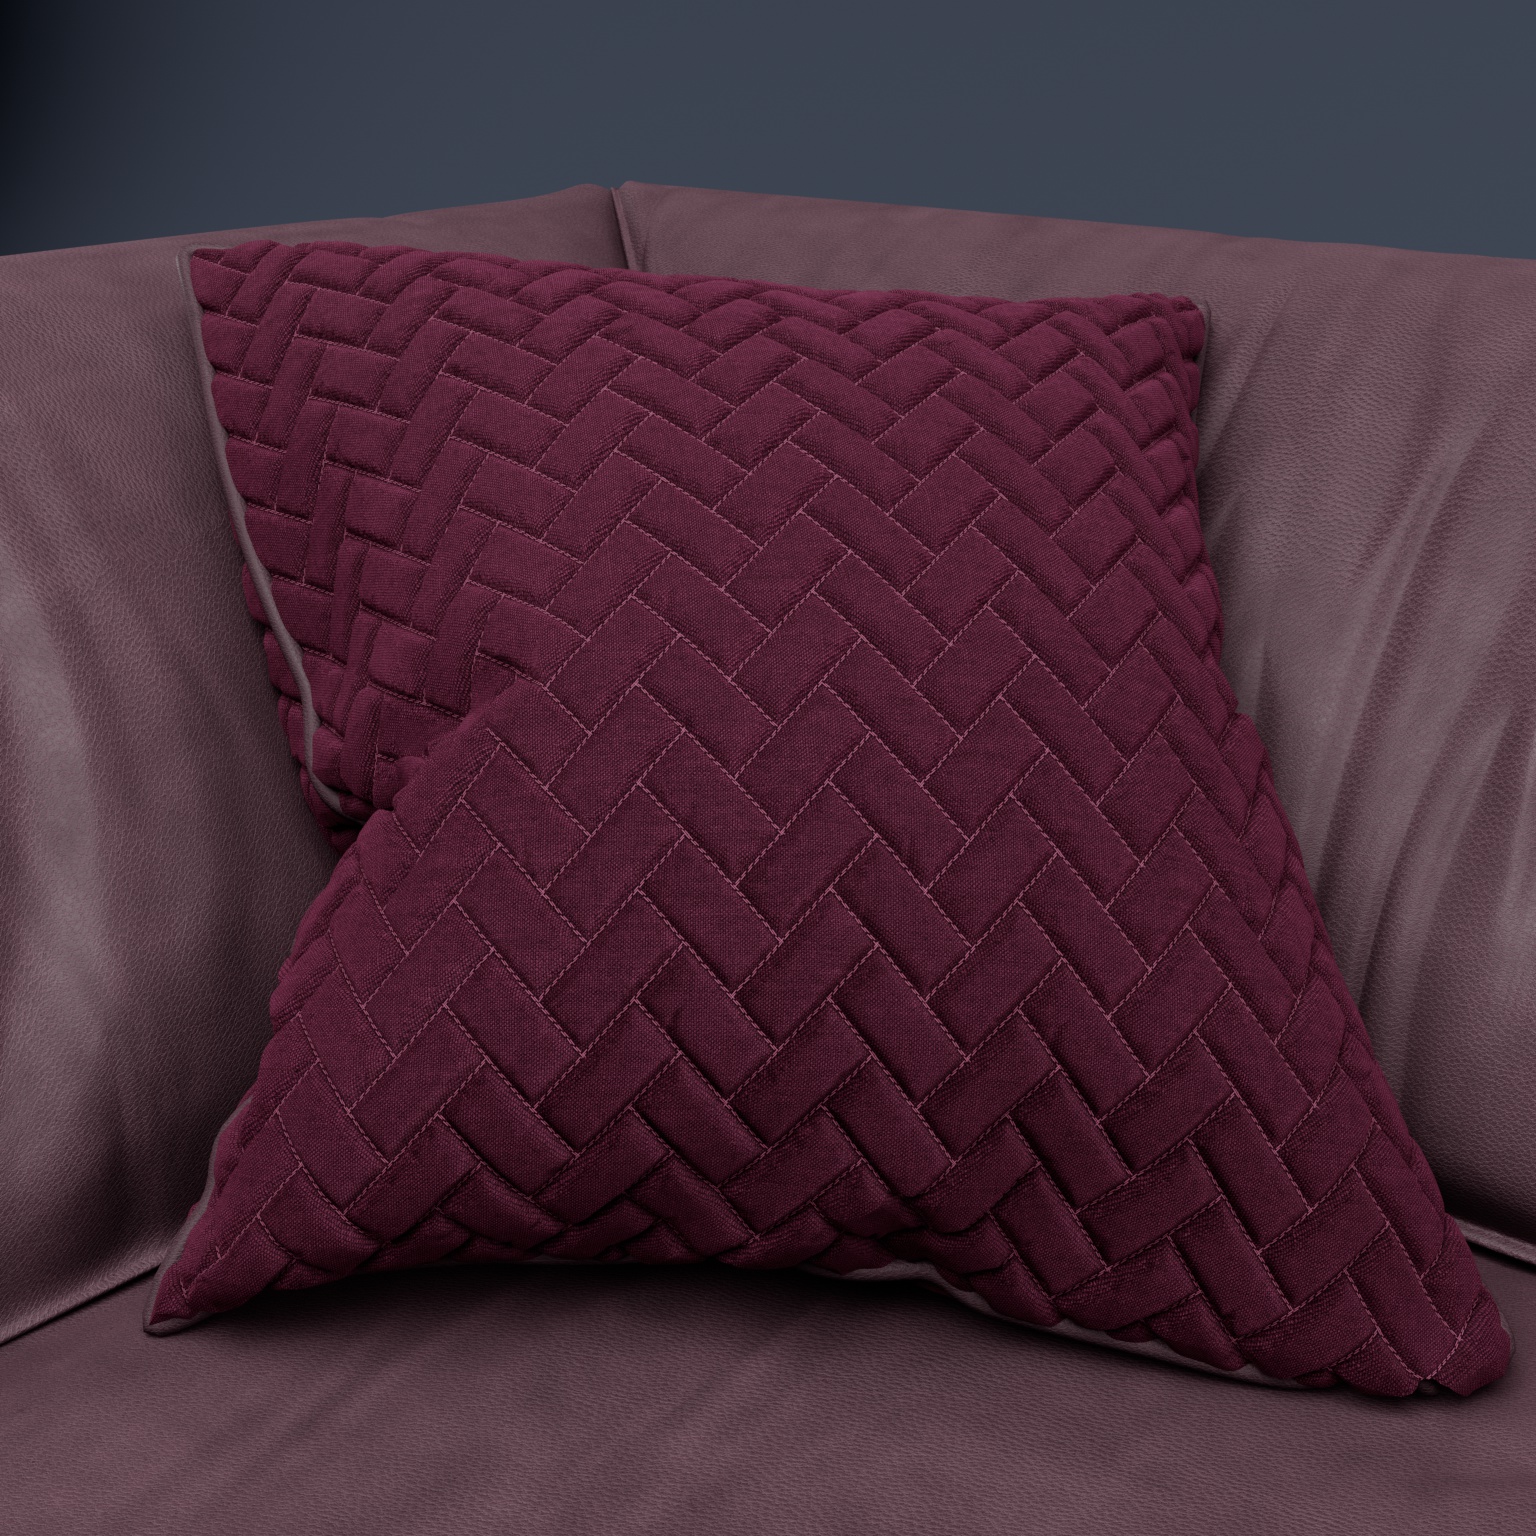 Quilted Padding Pattern1 test.jpg